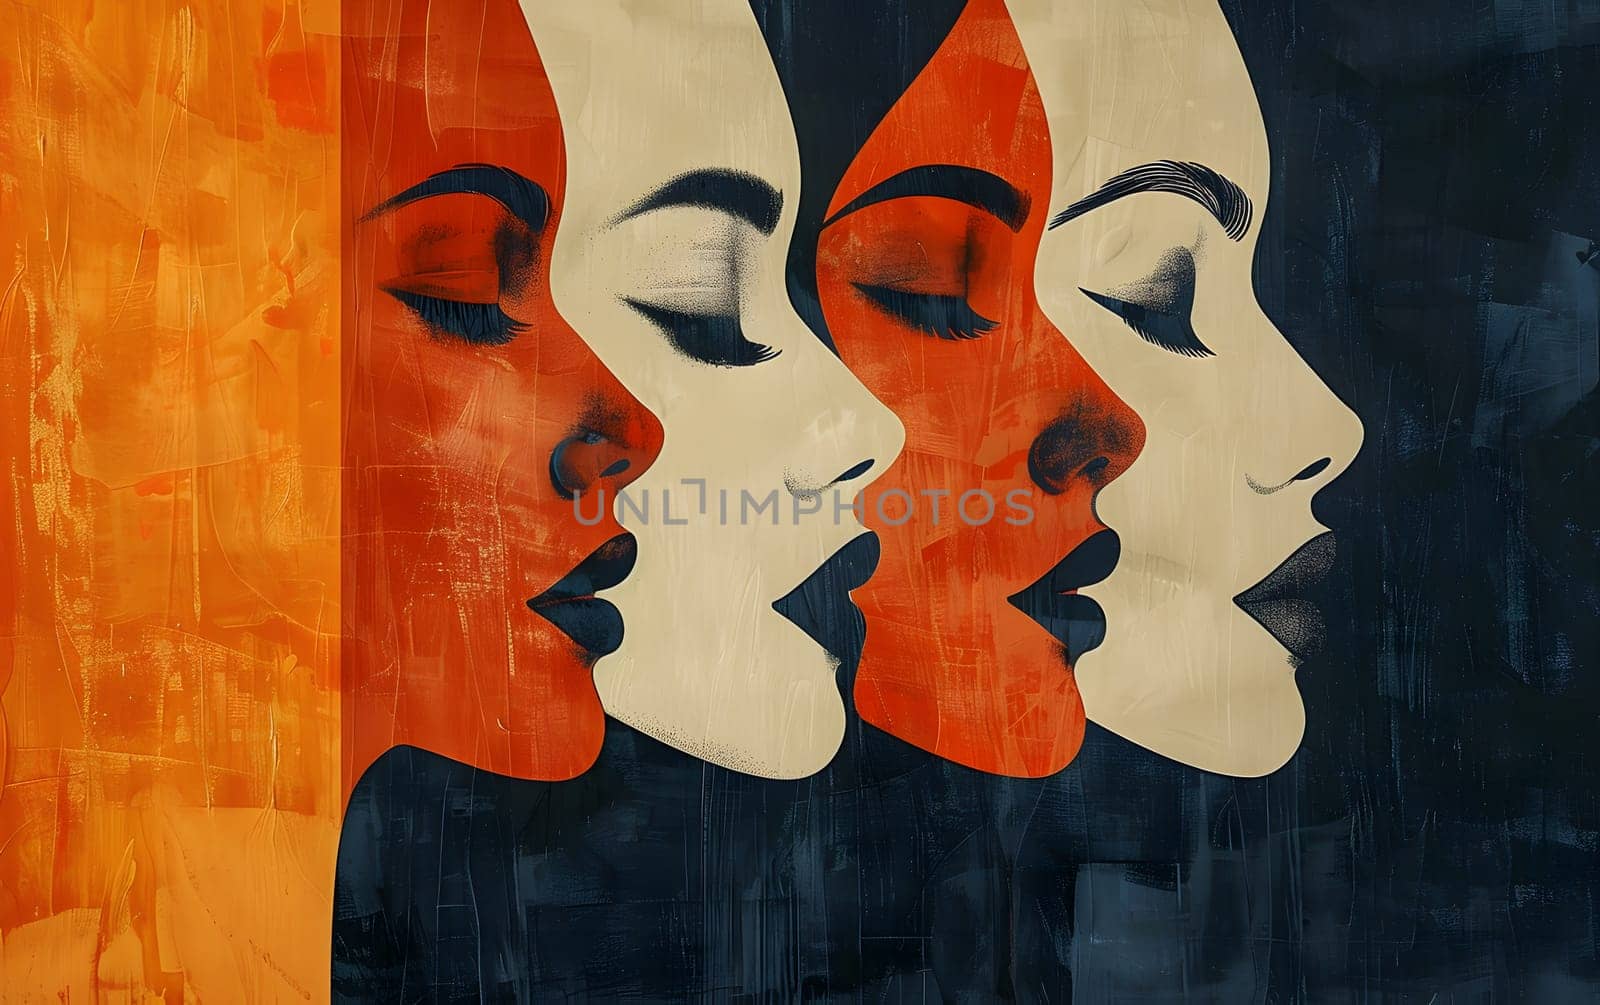 A painting on an orange wall of three womens faces with closed eyes. Each face shows delicate features like nose, cheek, and chin, capturing different facial expressions through art paint